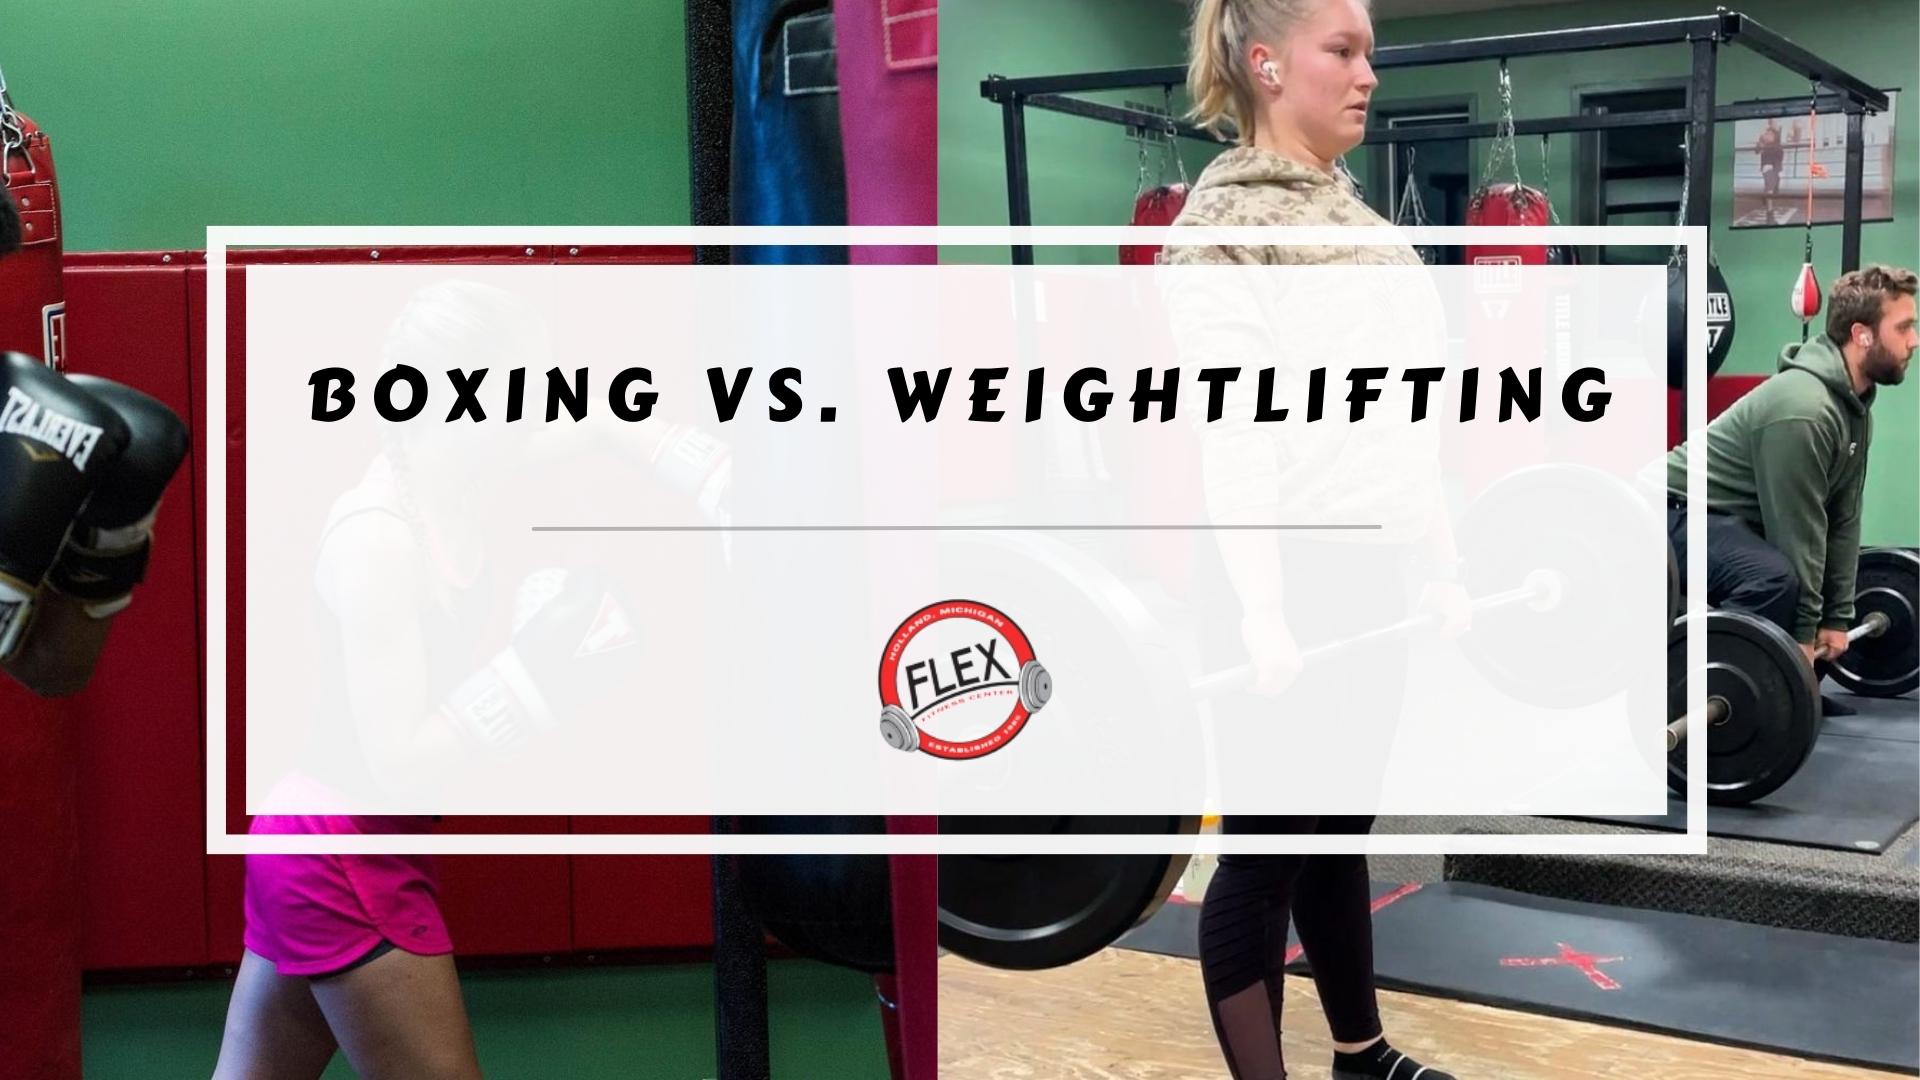 Featured image of boxing vs. weightlifting